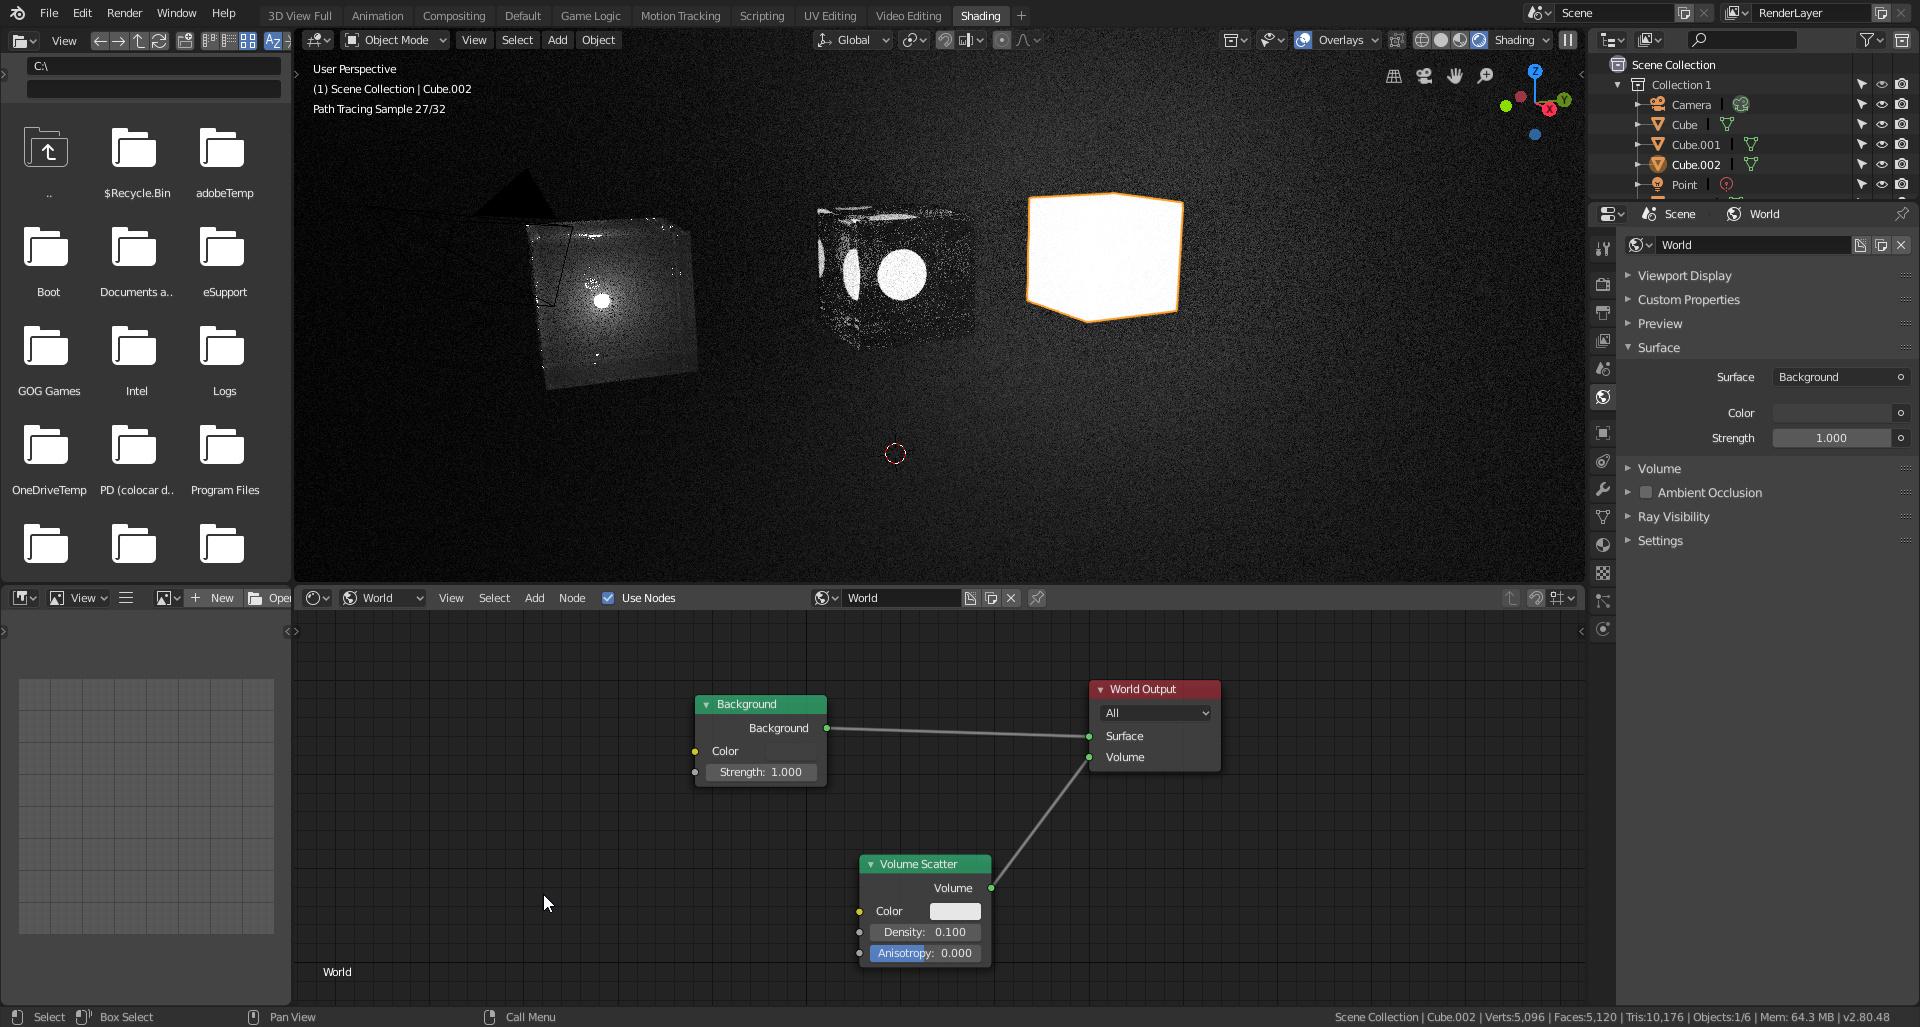 How to Add a Glow Effect in Cycles and Eevee (Blender Tutorial) 